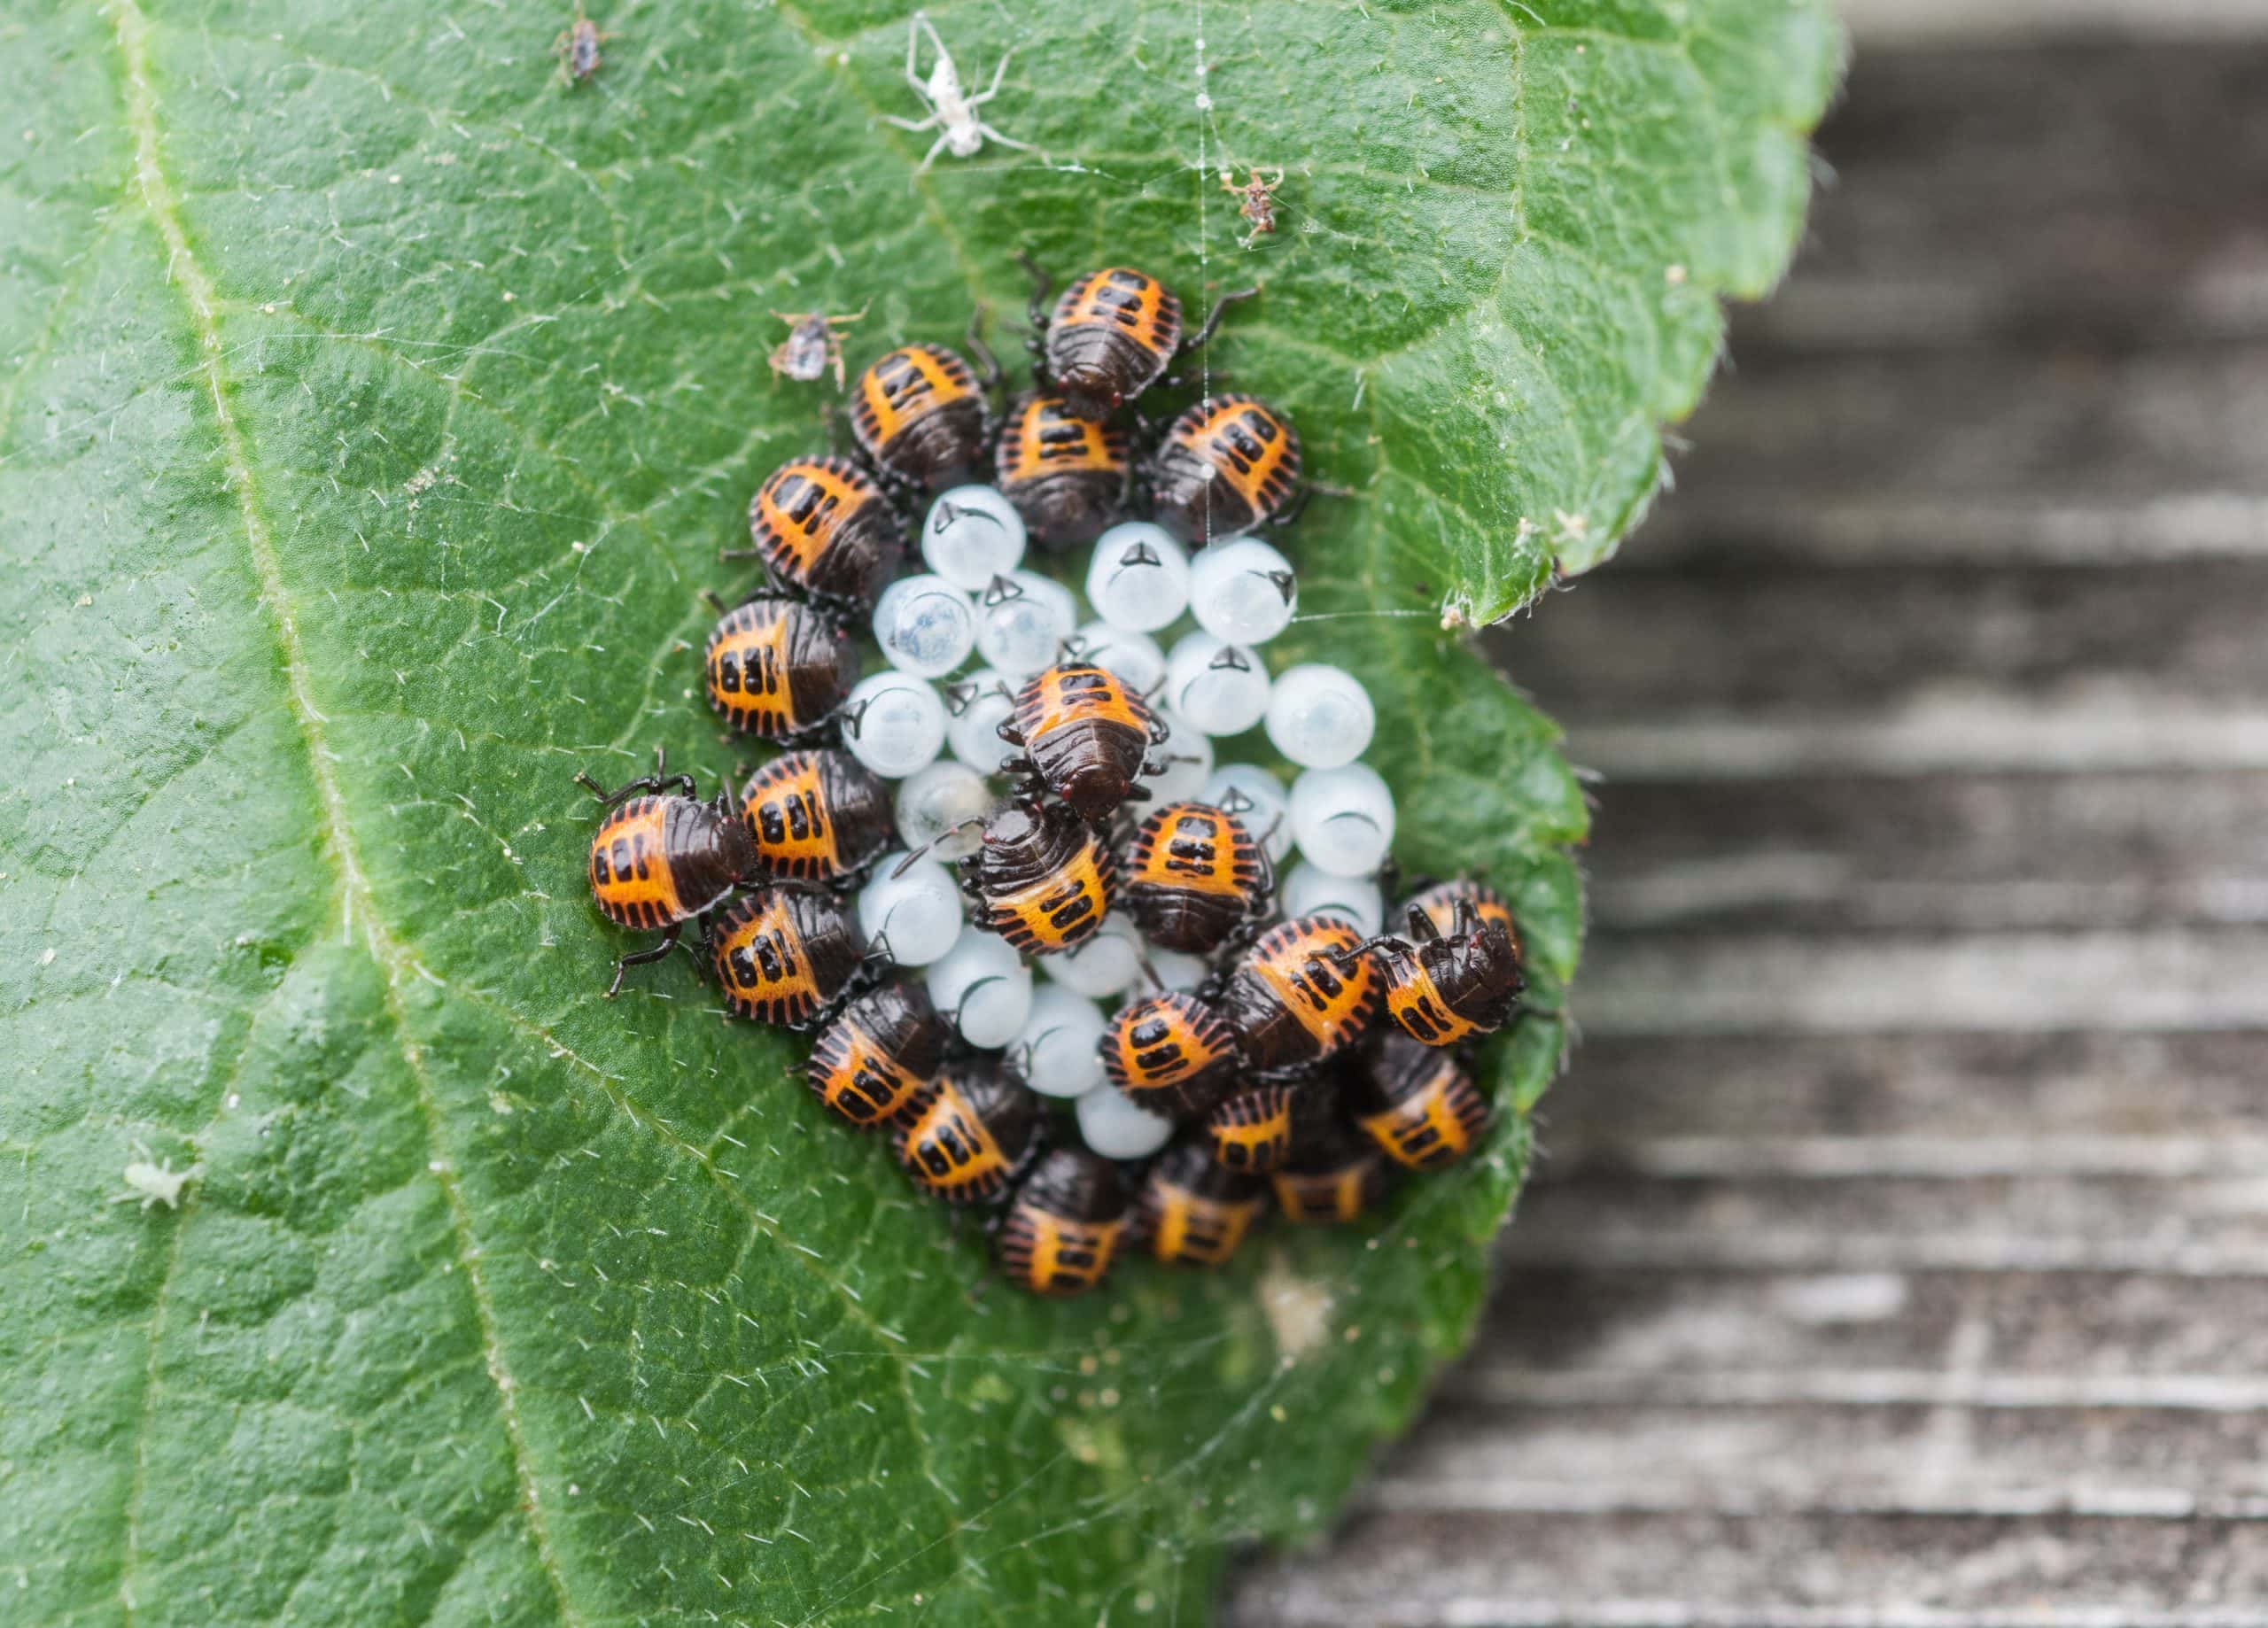 Bugs on a leaf demonstrate the addition of China to the BMSB emerging risk country list.